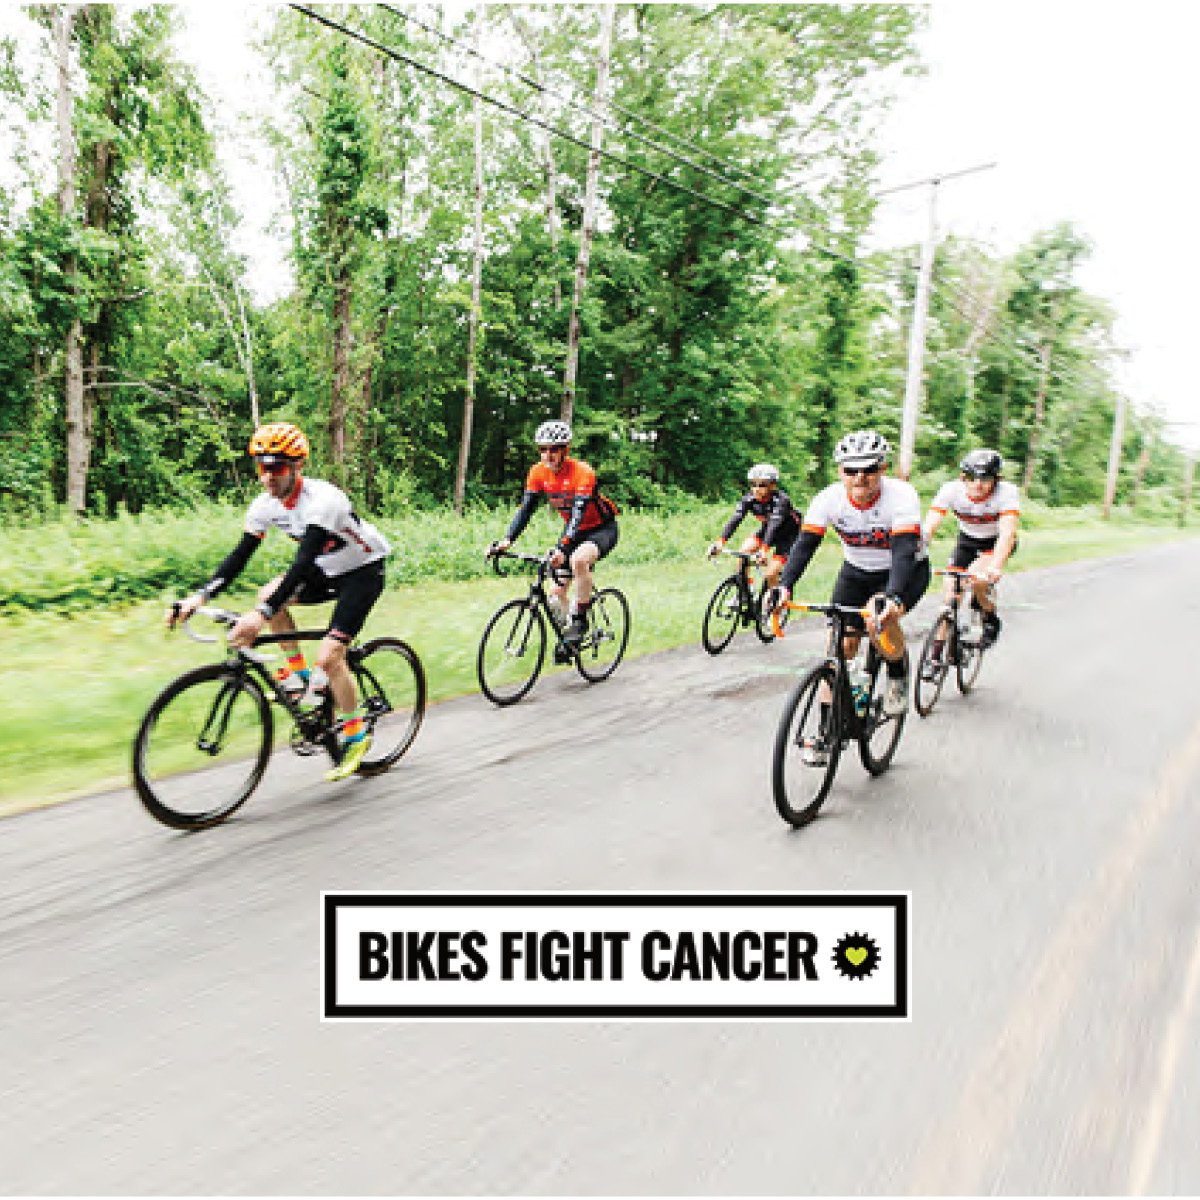 Bikes Fight Cancer logo with photo of cyclists riding on a road